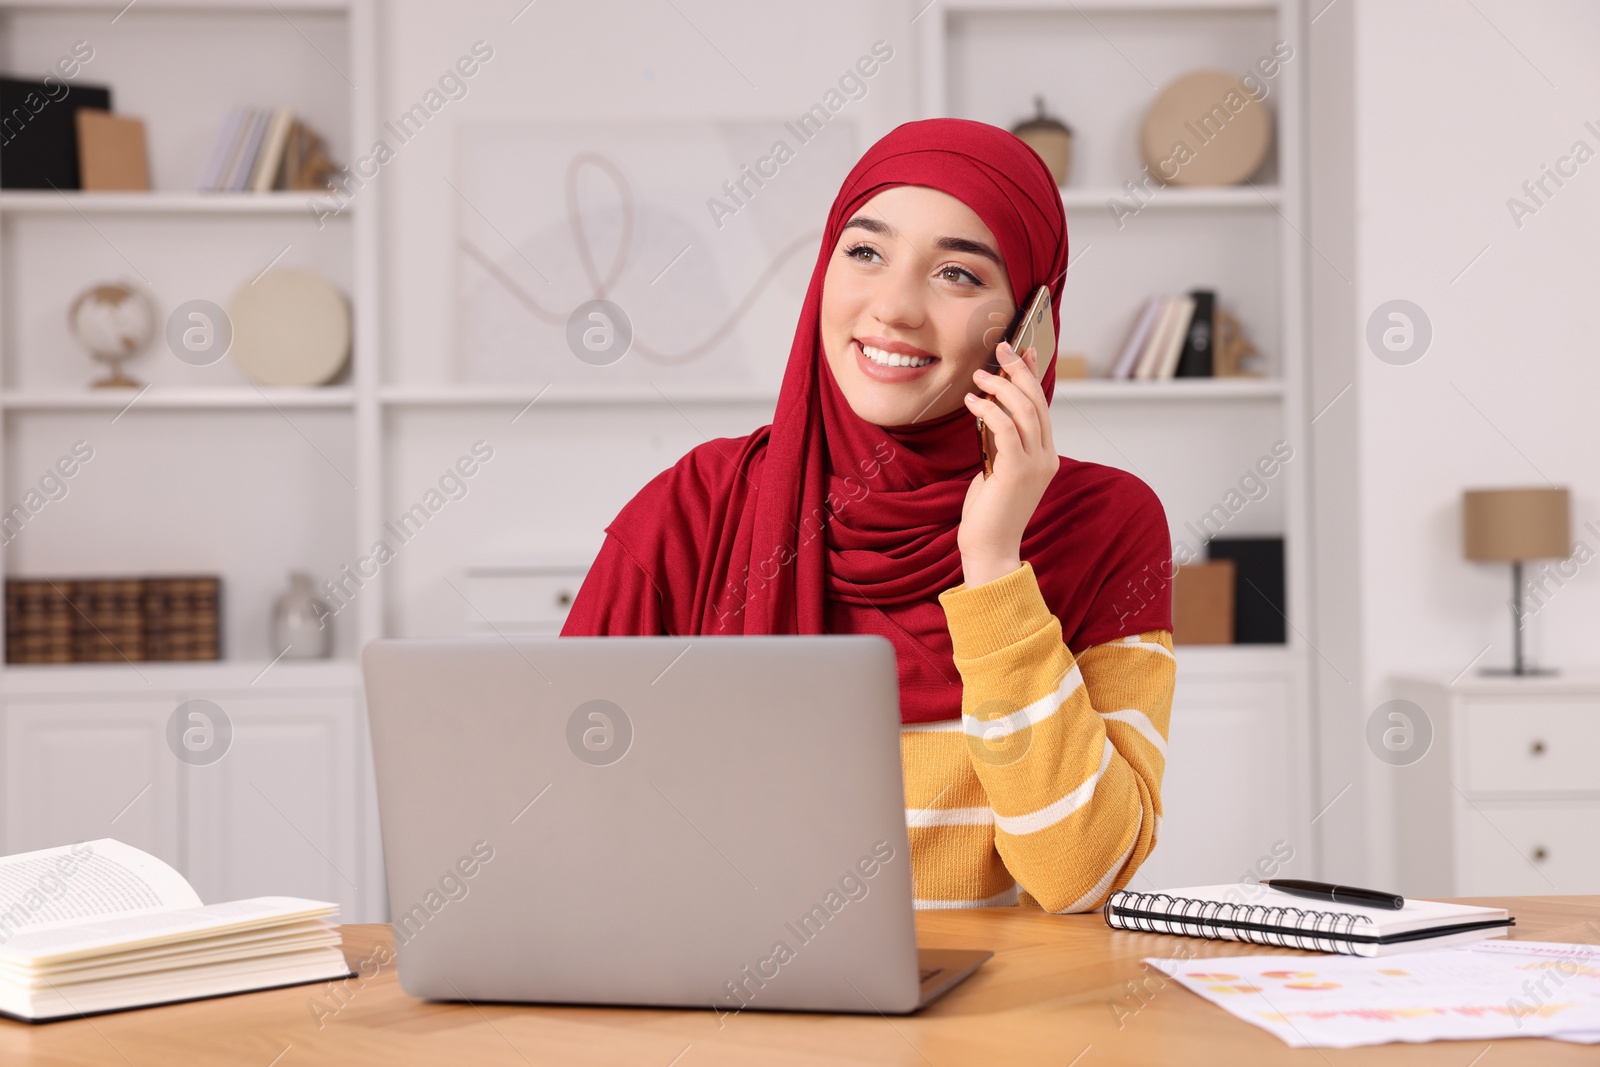 Photo of Muslim woman in hijab talking on smartphone while using laptop at wooden table in room